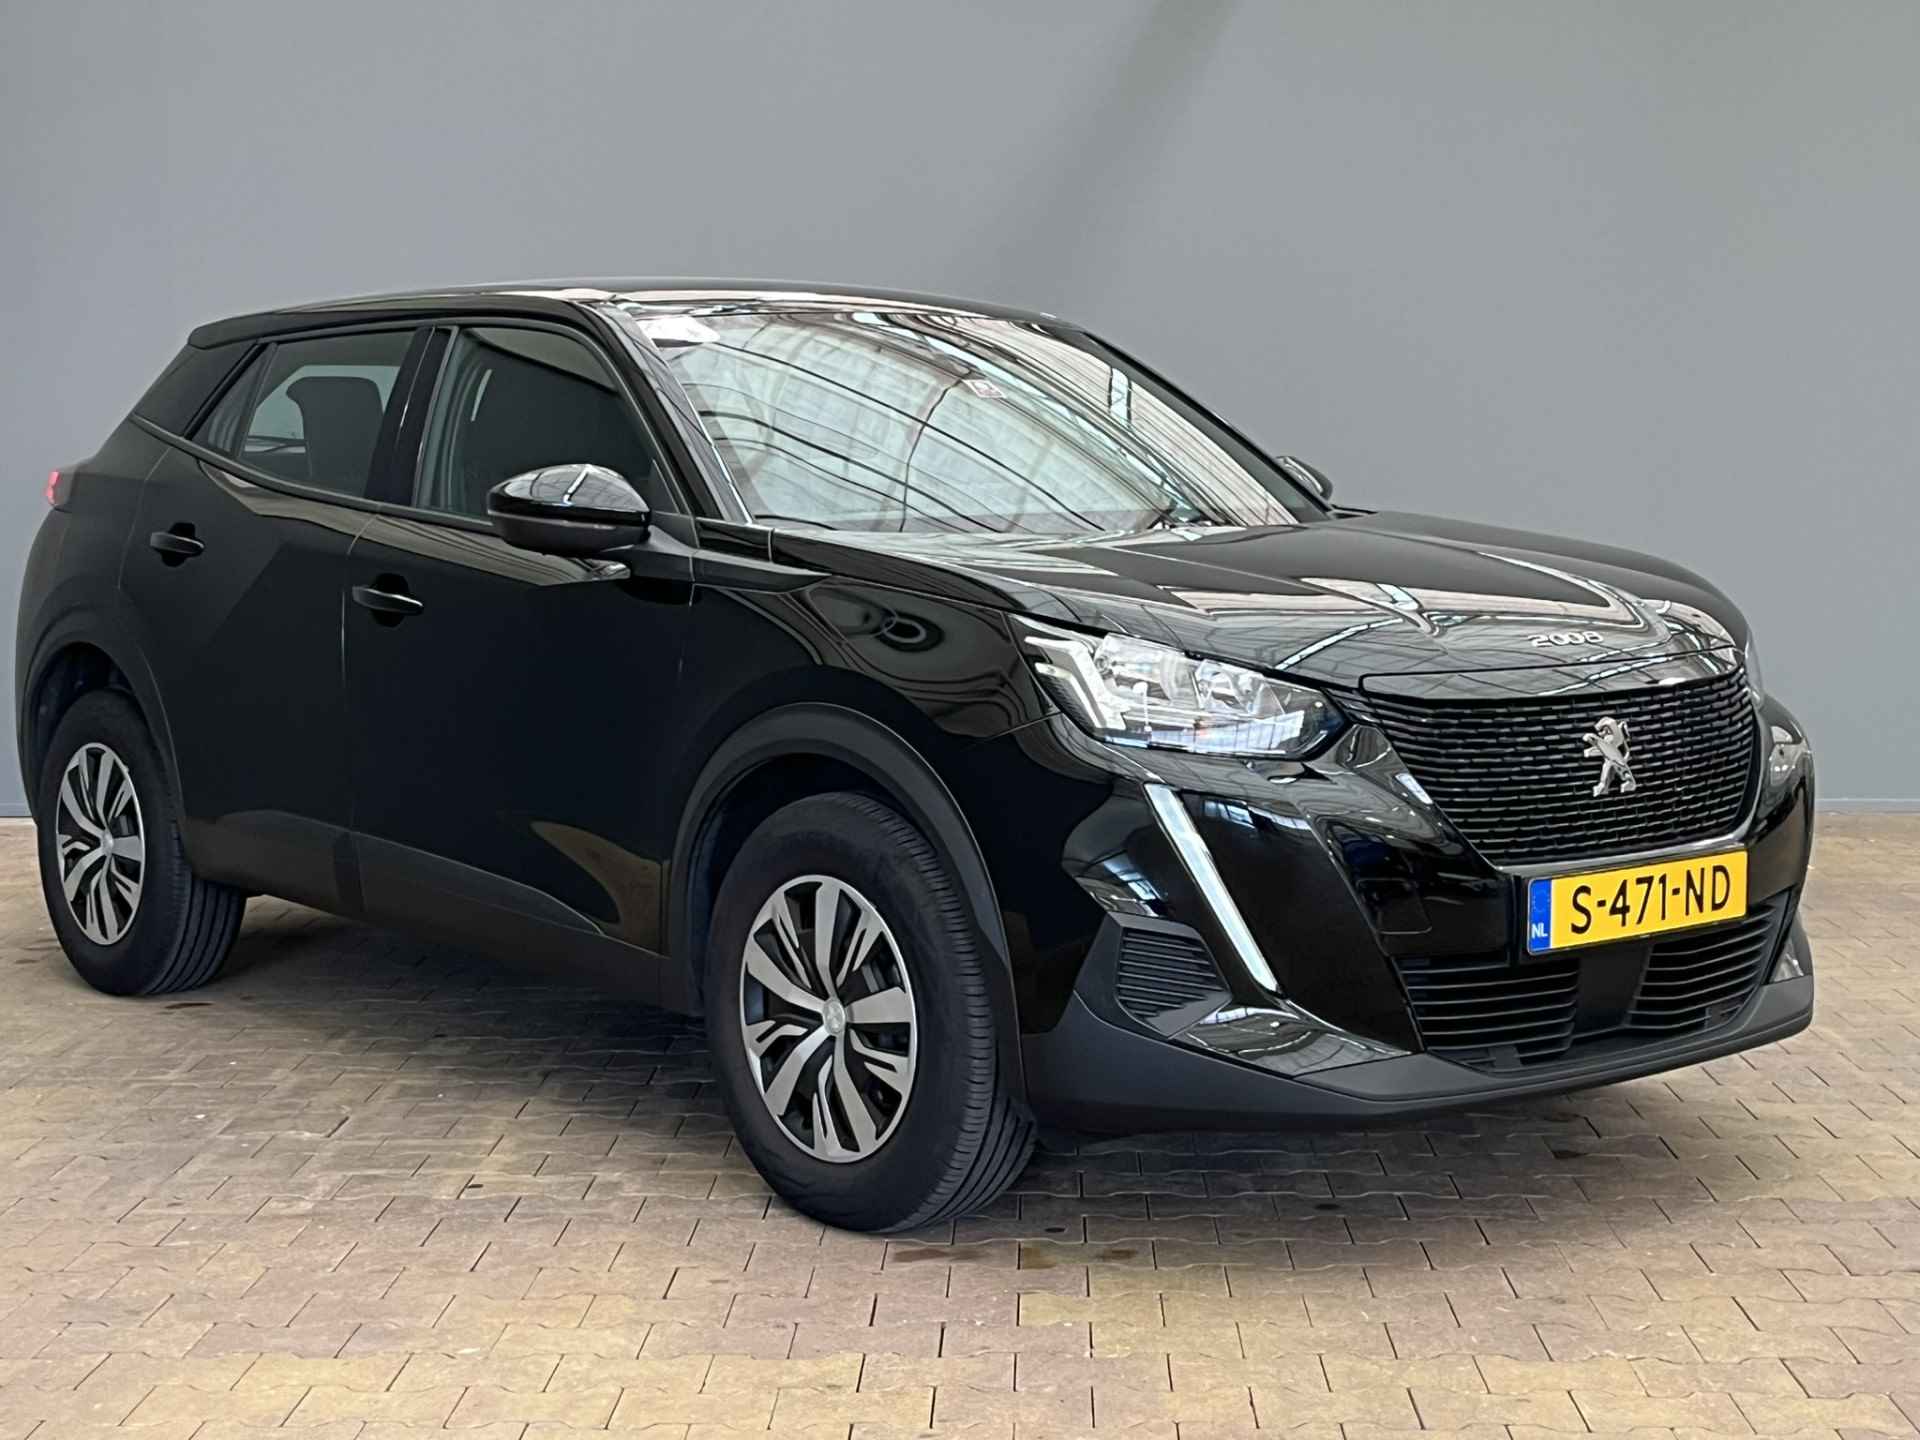 Peugeot 2008 1.2 100PK Active | Parkeersensoren Achter | Apple/Android Carplay | Airco | Cruise | LED | DAB | Bluetooth | Centrale Vergrendeling - 9/32